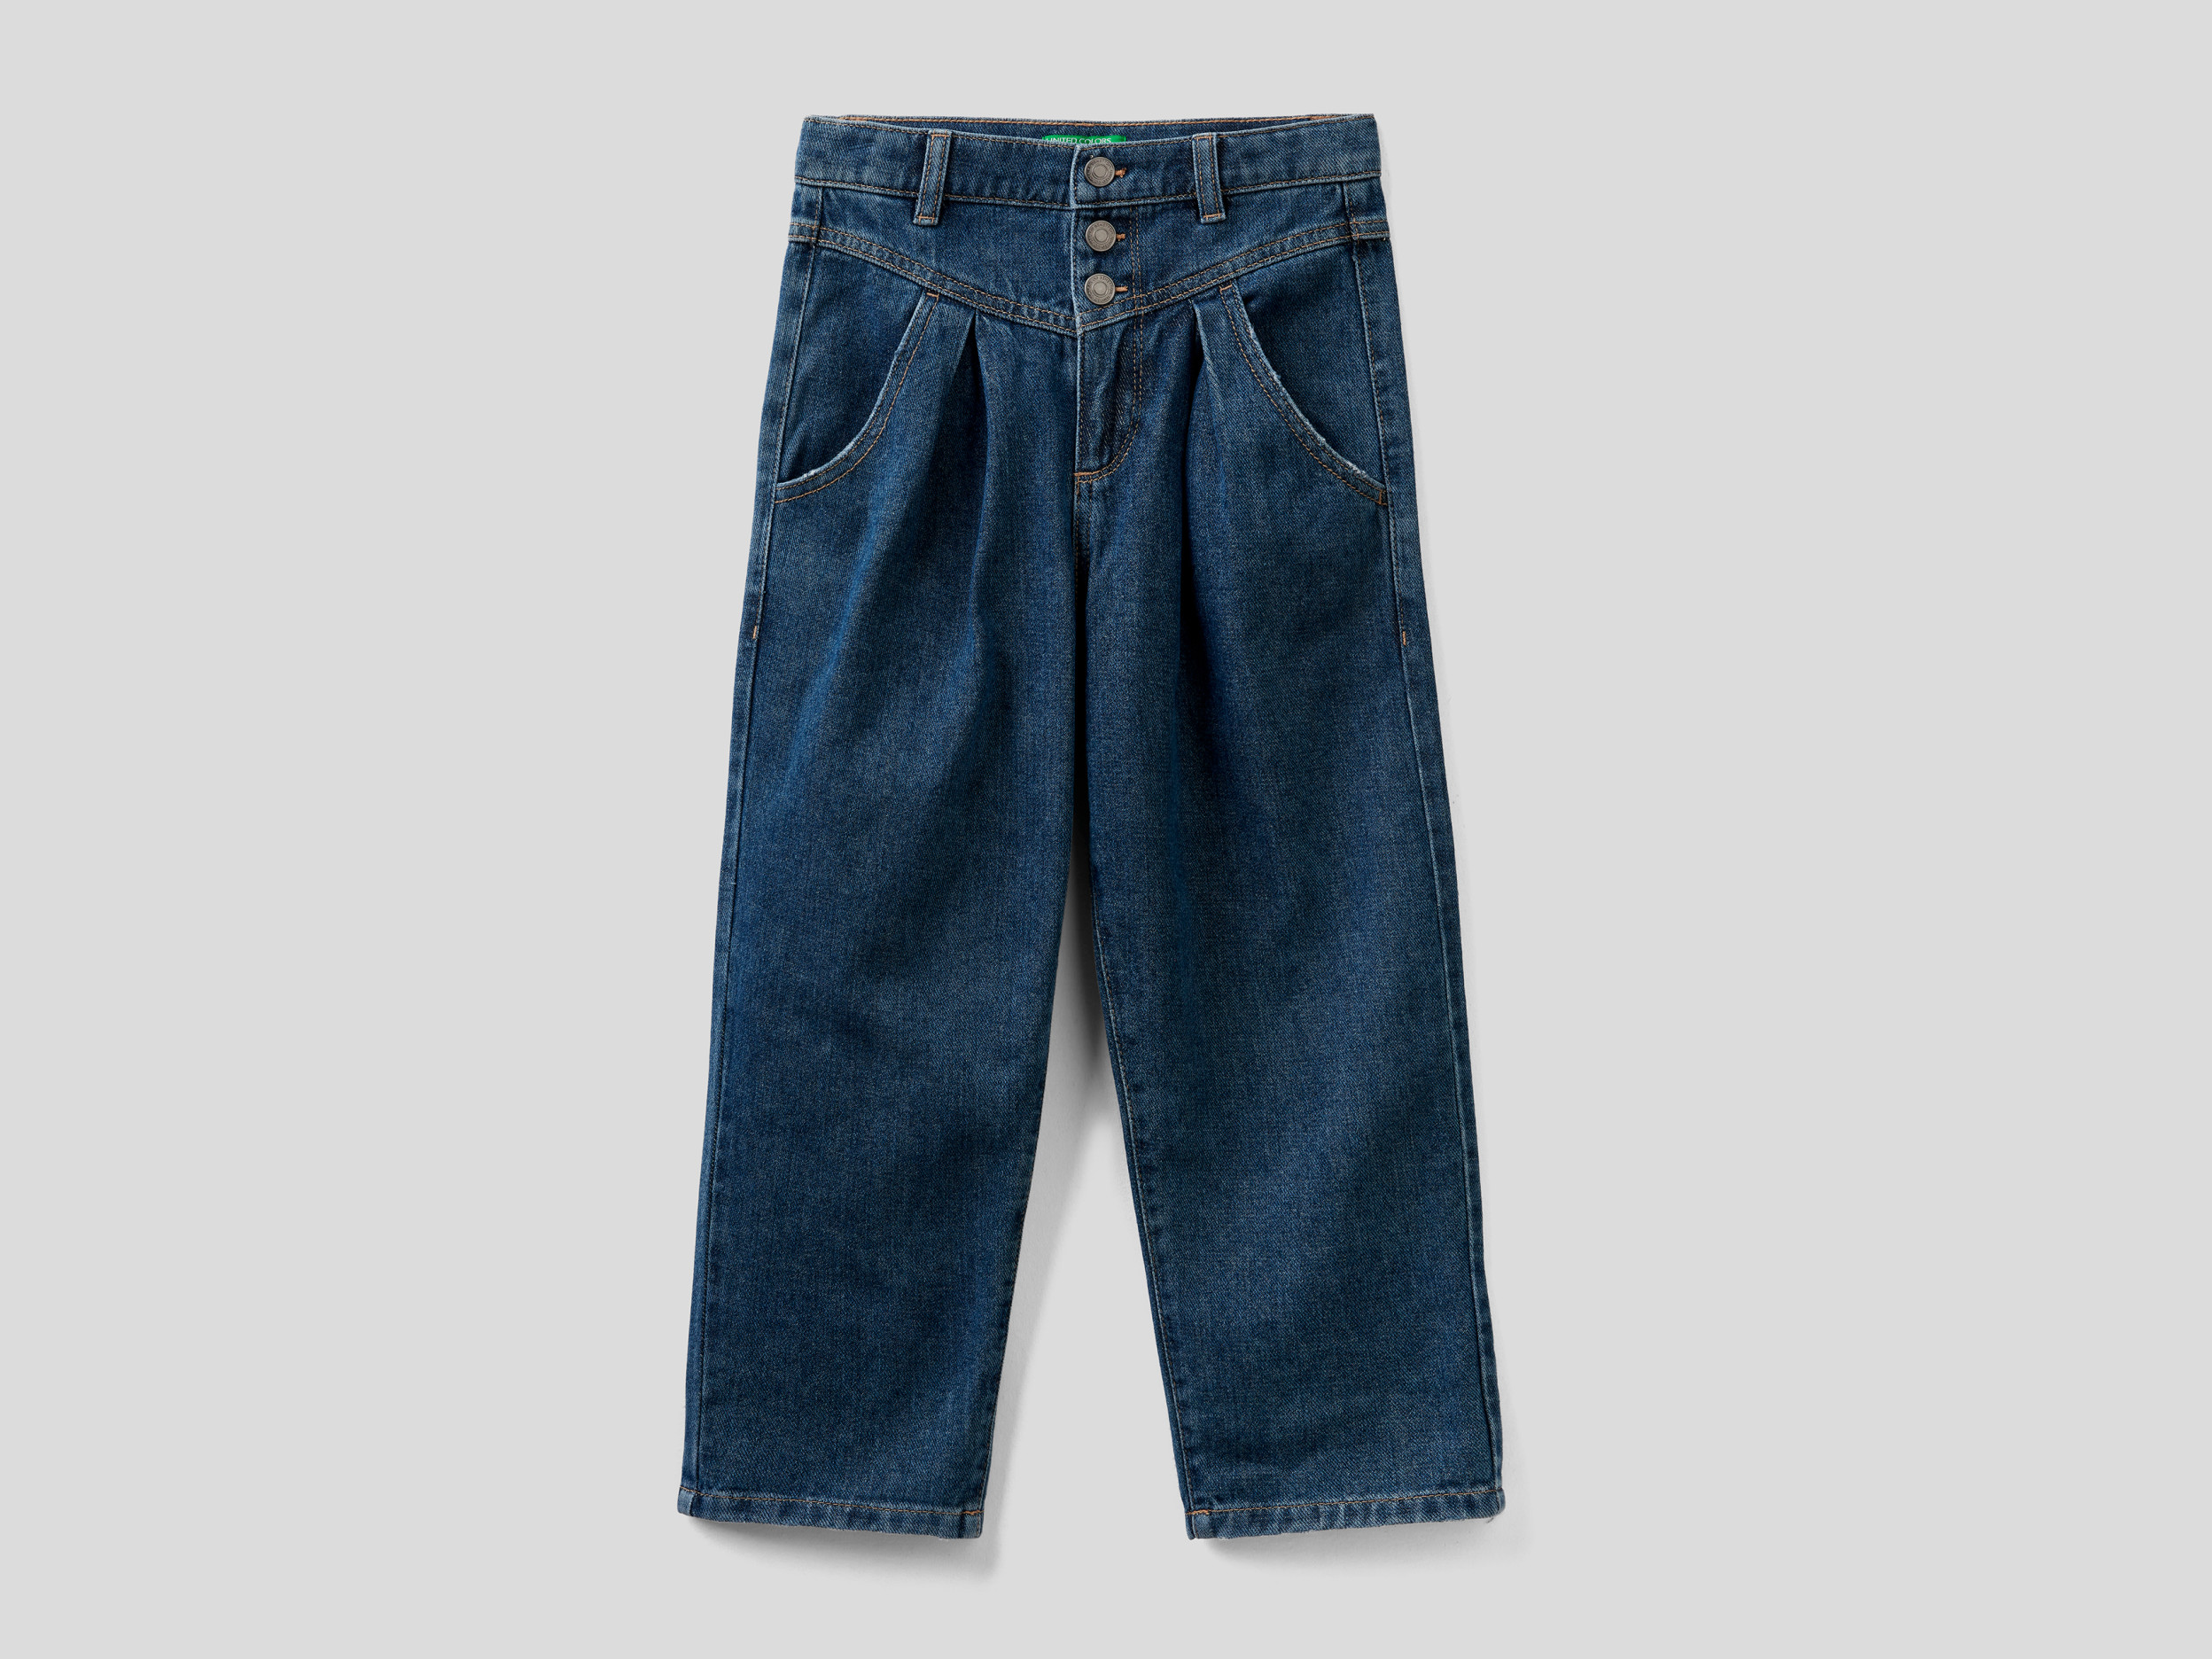 Benetton, Jeans Slouchy In Denim eco recycle, Blu Scuro, Bambini